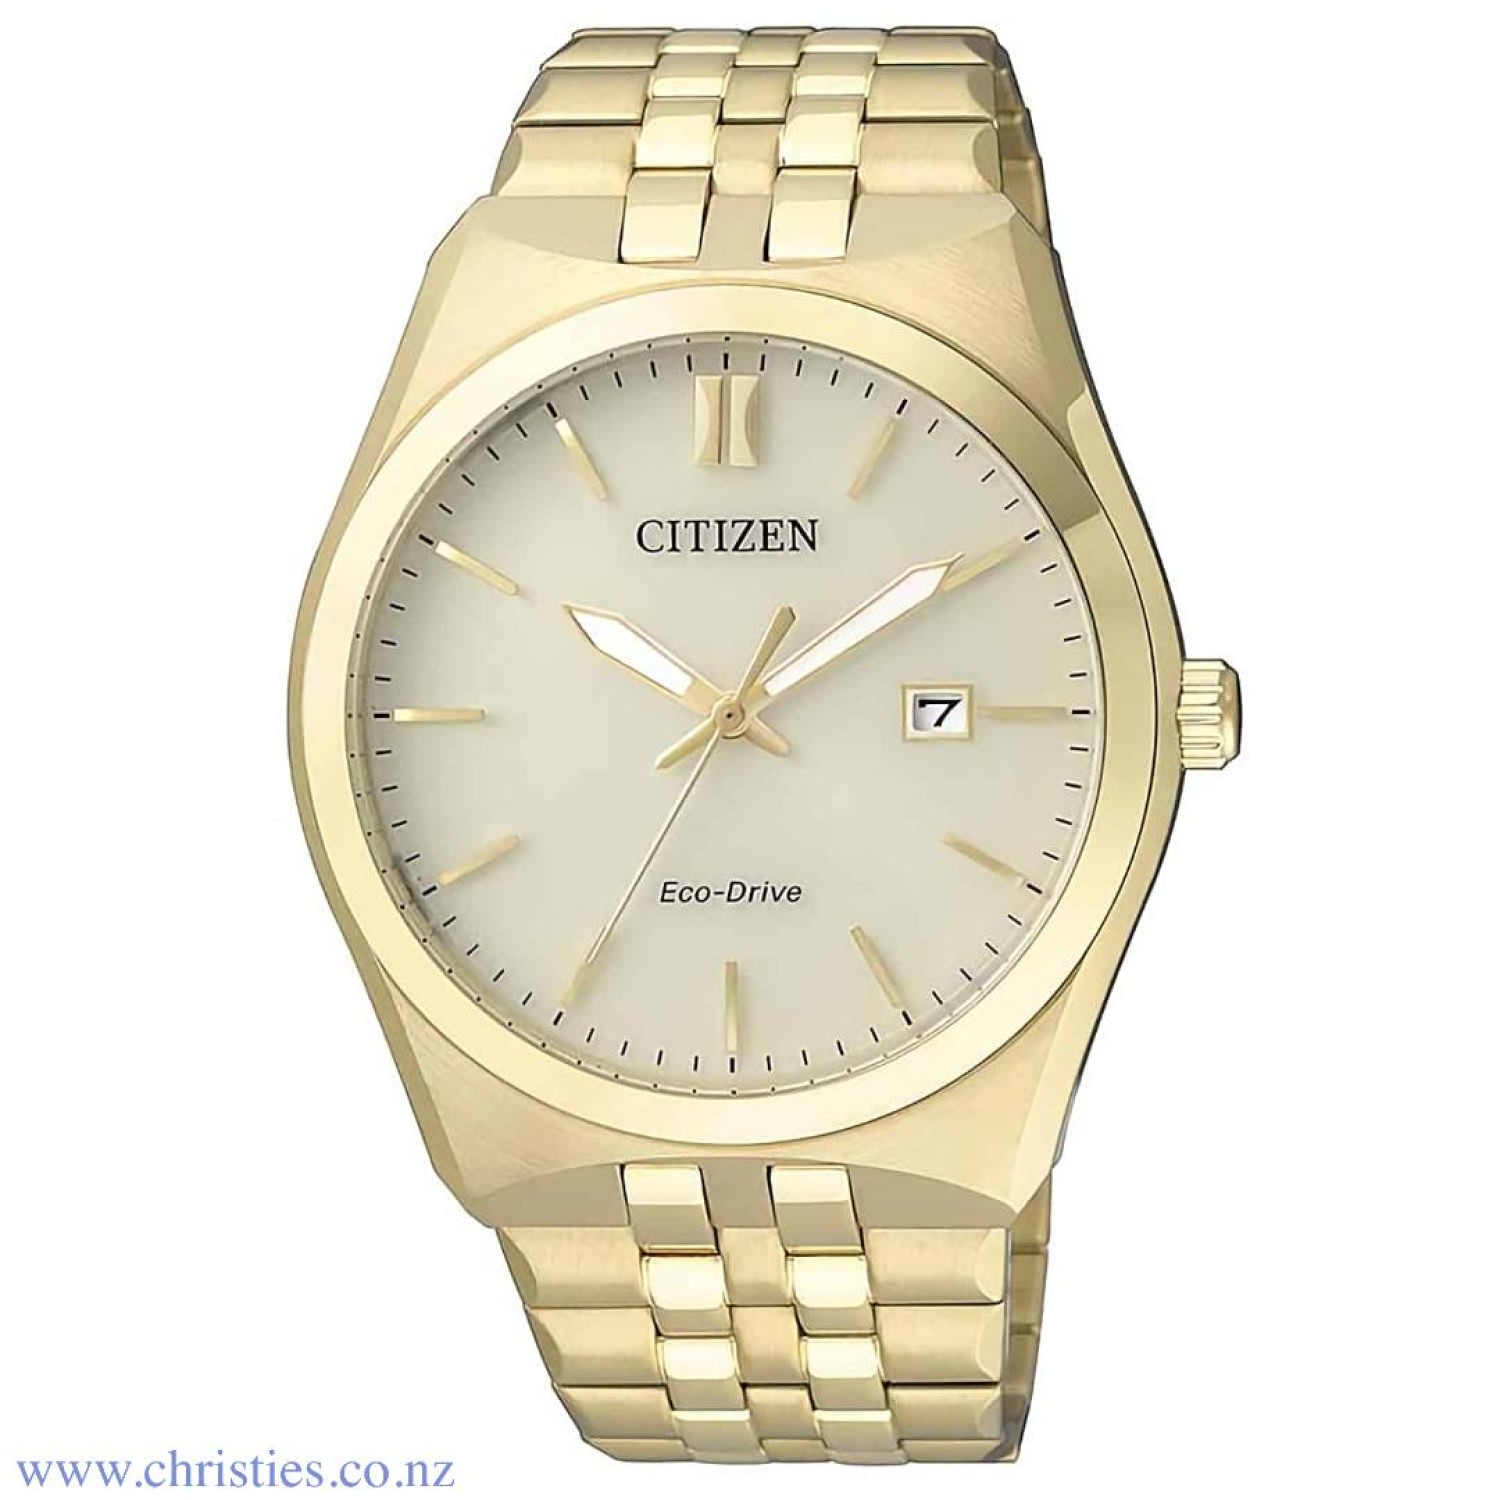 BM7332-61P CITIZEN Eco-Drive Watch. Classically styled with sophisticated performance features, this carefully designed watch was created to maintain a refined look while standing up to the challenges generated by an active lifestyle. Eco-Drive gives this